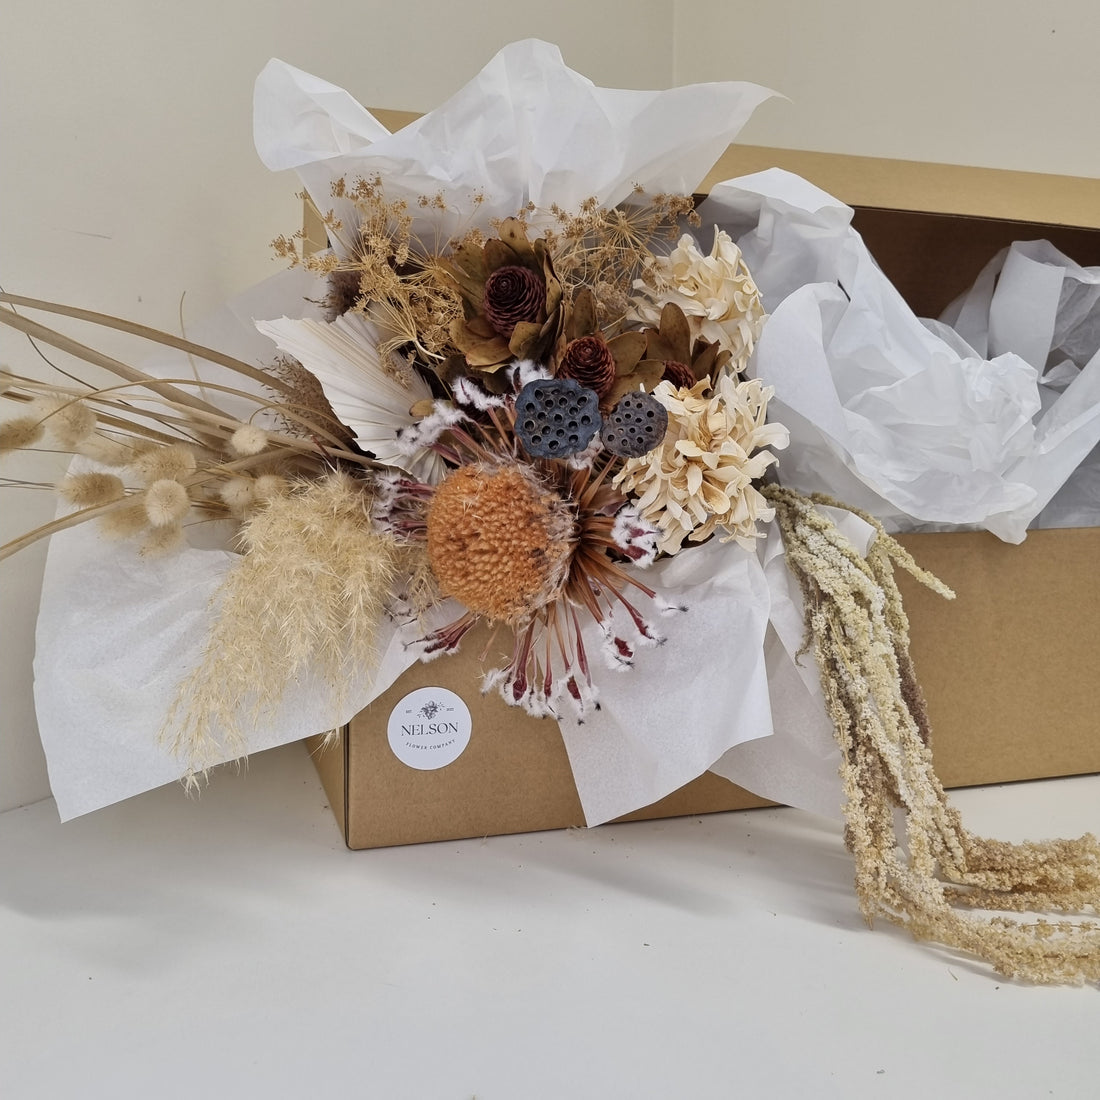 Naturally Neutral Dried Flower Box in cardboard box with white tissue paper.